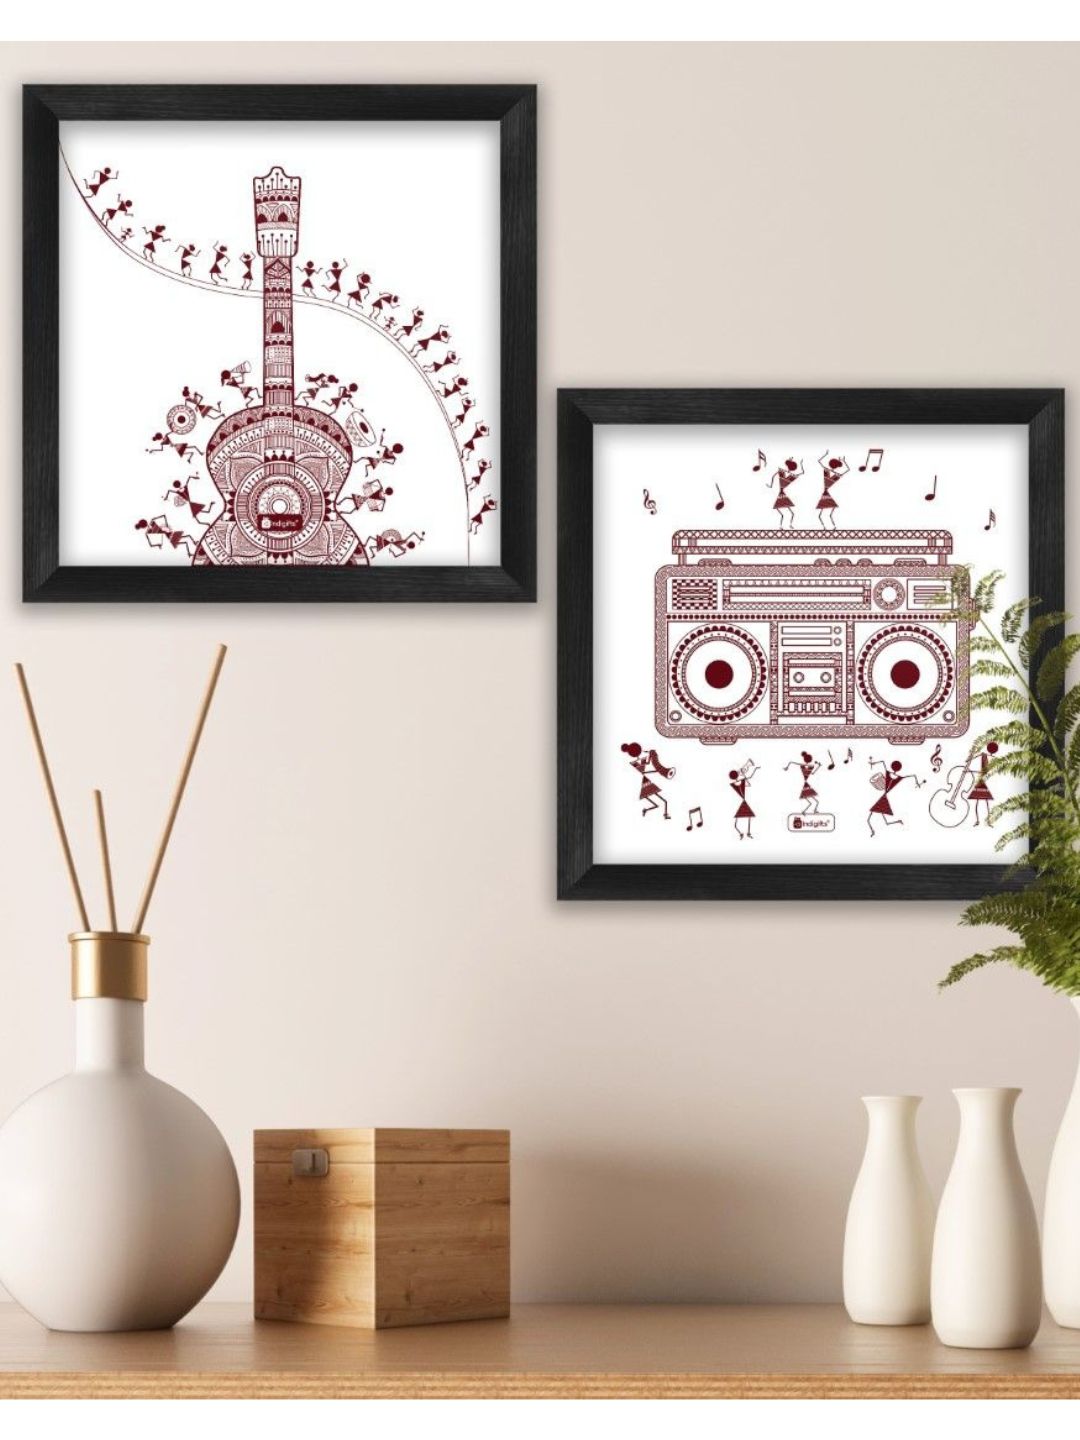 Indigifts Wall Decor For Living Room Music Lover Artistic Design Digital Print Poster Frames 6″x6″ Set of 2 – Home Wall Decorations Items, Diwali Home Decoration Items, Warli Art Posters Frame